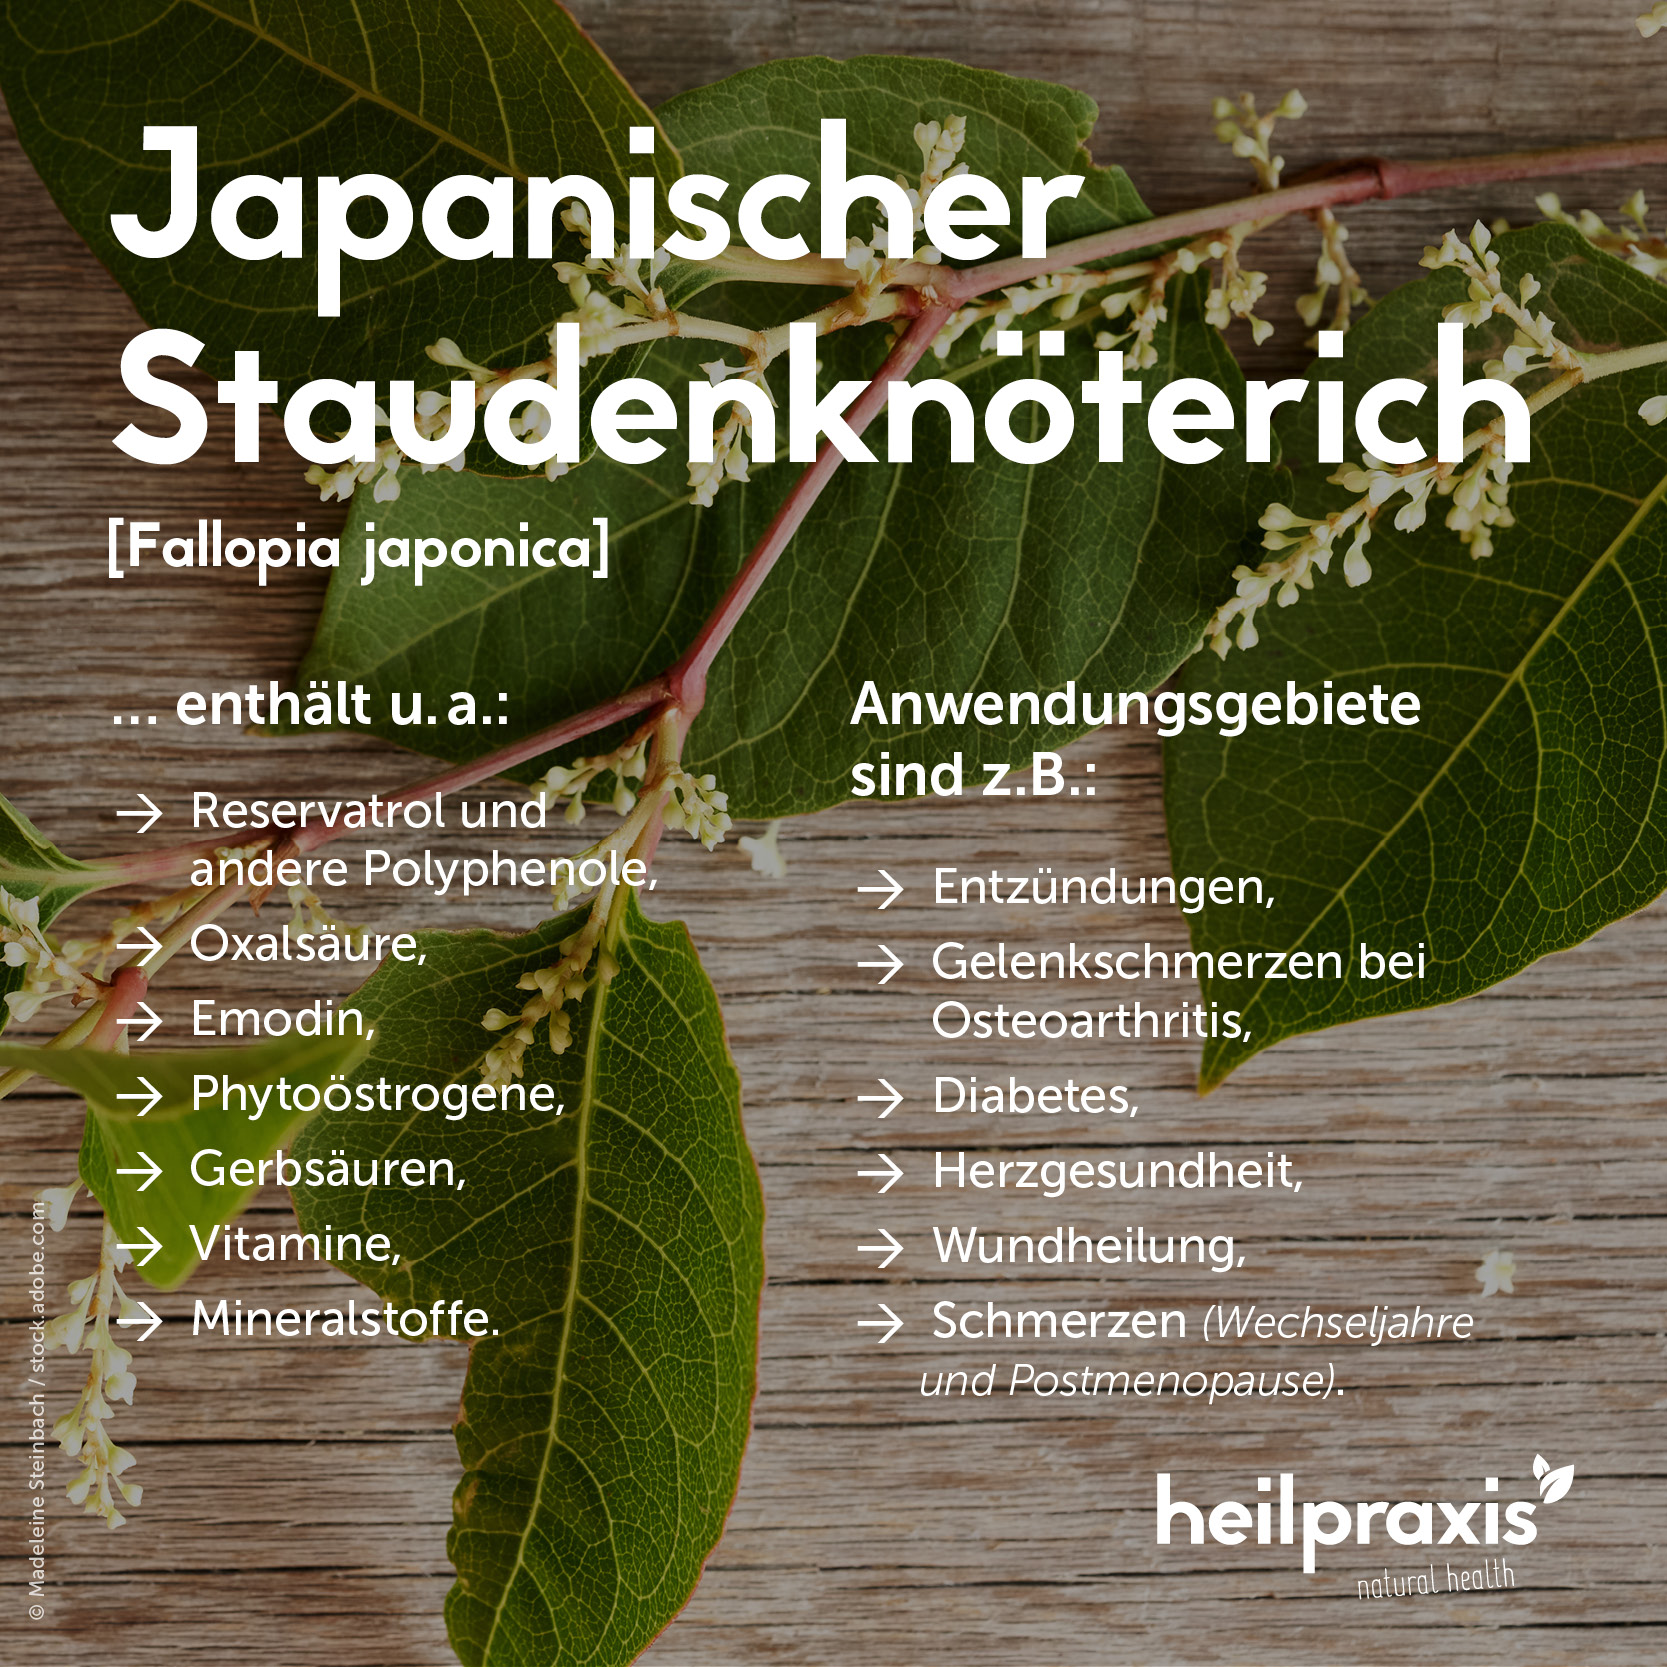 Overview graphic of the ingredients and application of Japanese knotweed